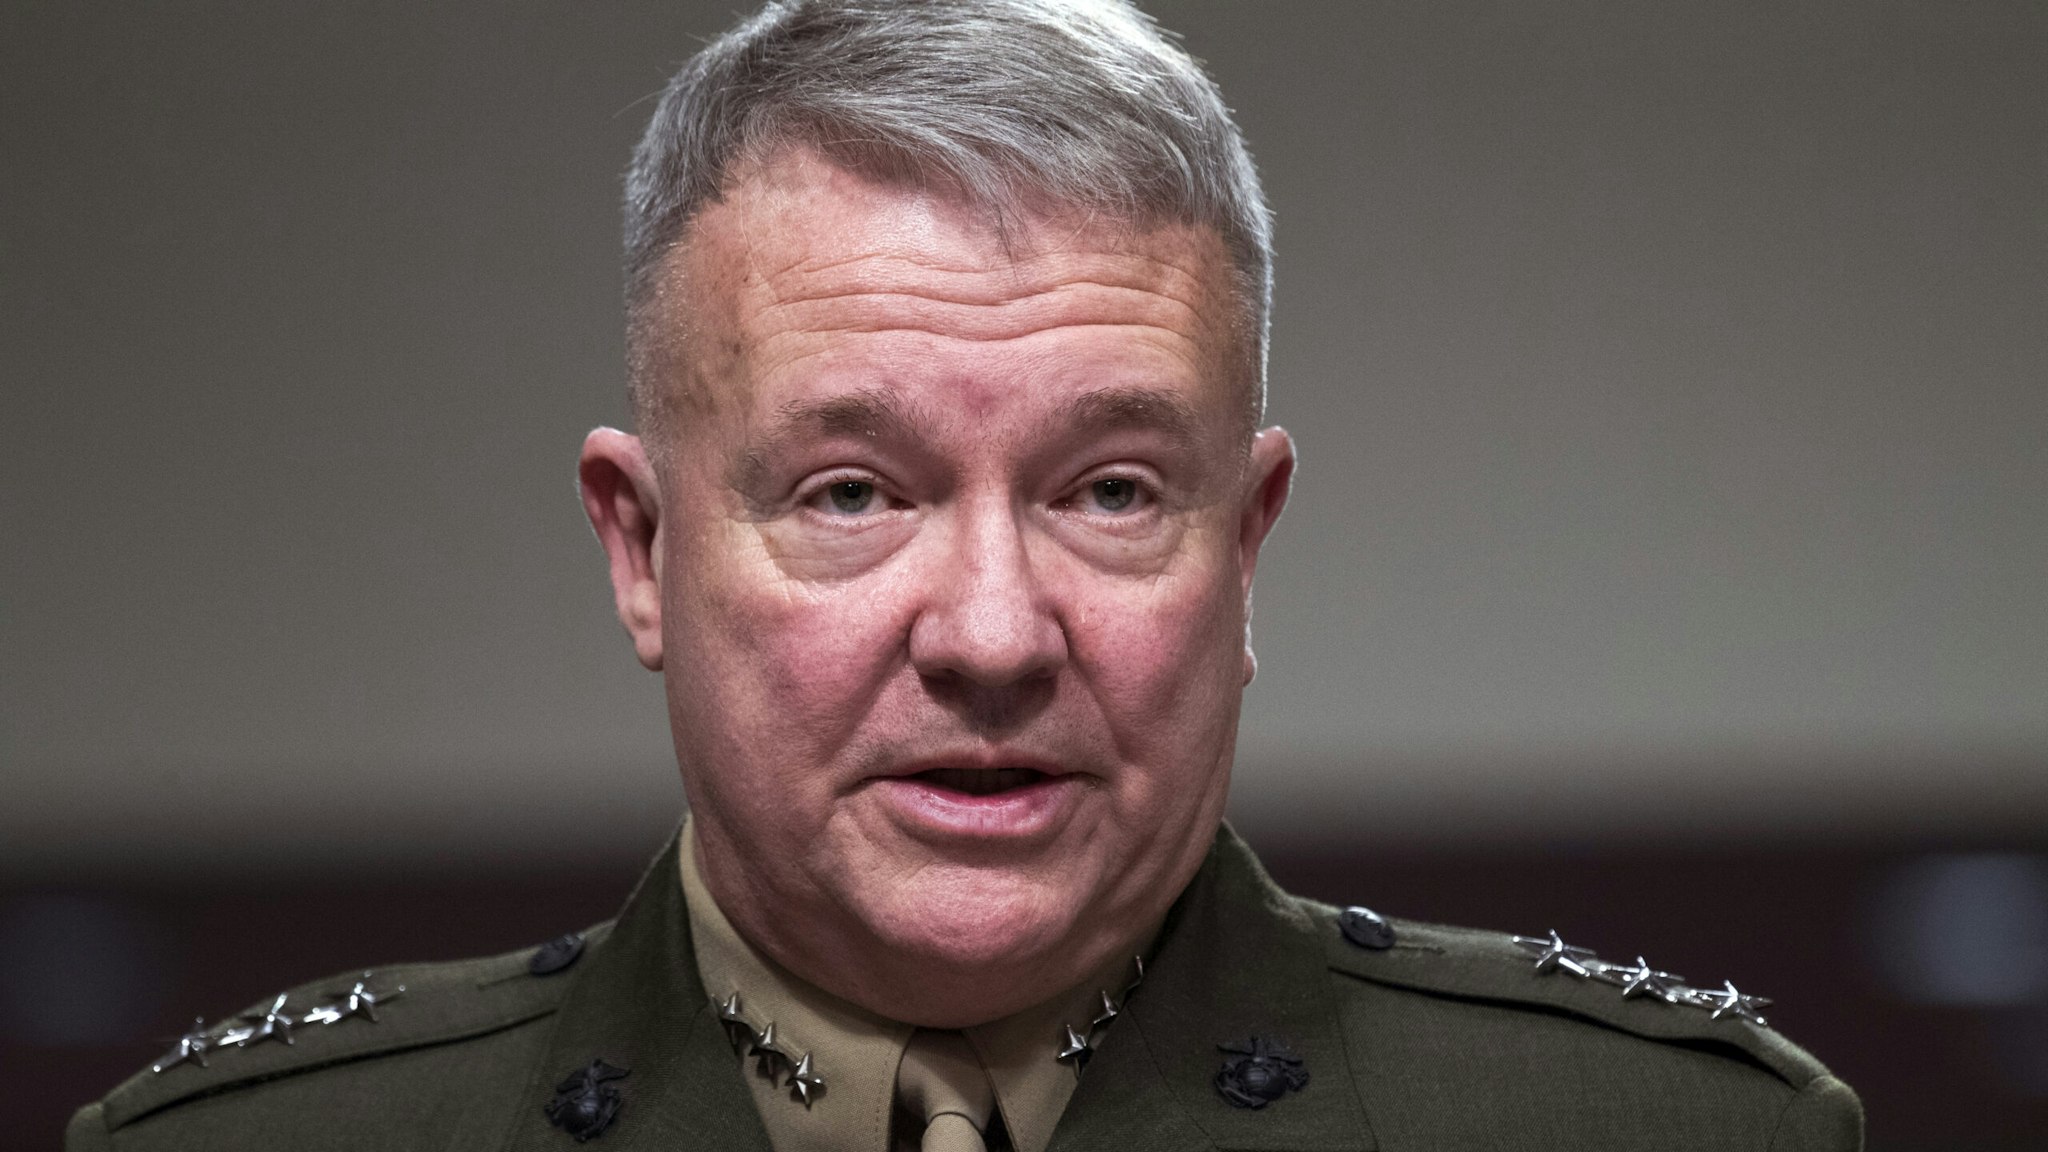 UNITED STATES - DECEMBER 4: Lt. Gen. Kenneth F. McKenzie, Jr., USMC, testifies during a Senate Armed Services Committee confirmation hearing in Dirksen Building on December 4, 2018. McKenzie is nominated to serve as General And Commander, U.S. Central Command, and Lt. Gen. Richard D. Clarke, U.S. Army, is nominated to serve as General And Commander, US Special Operations Command.